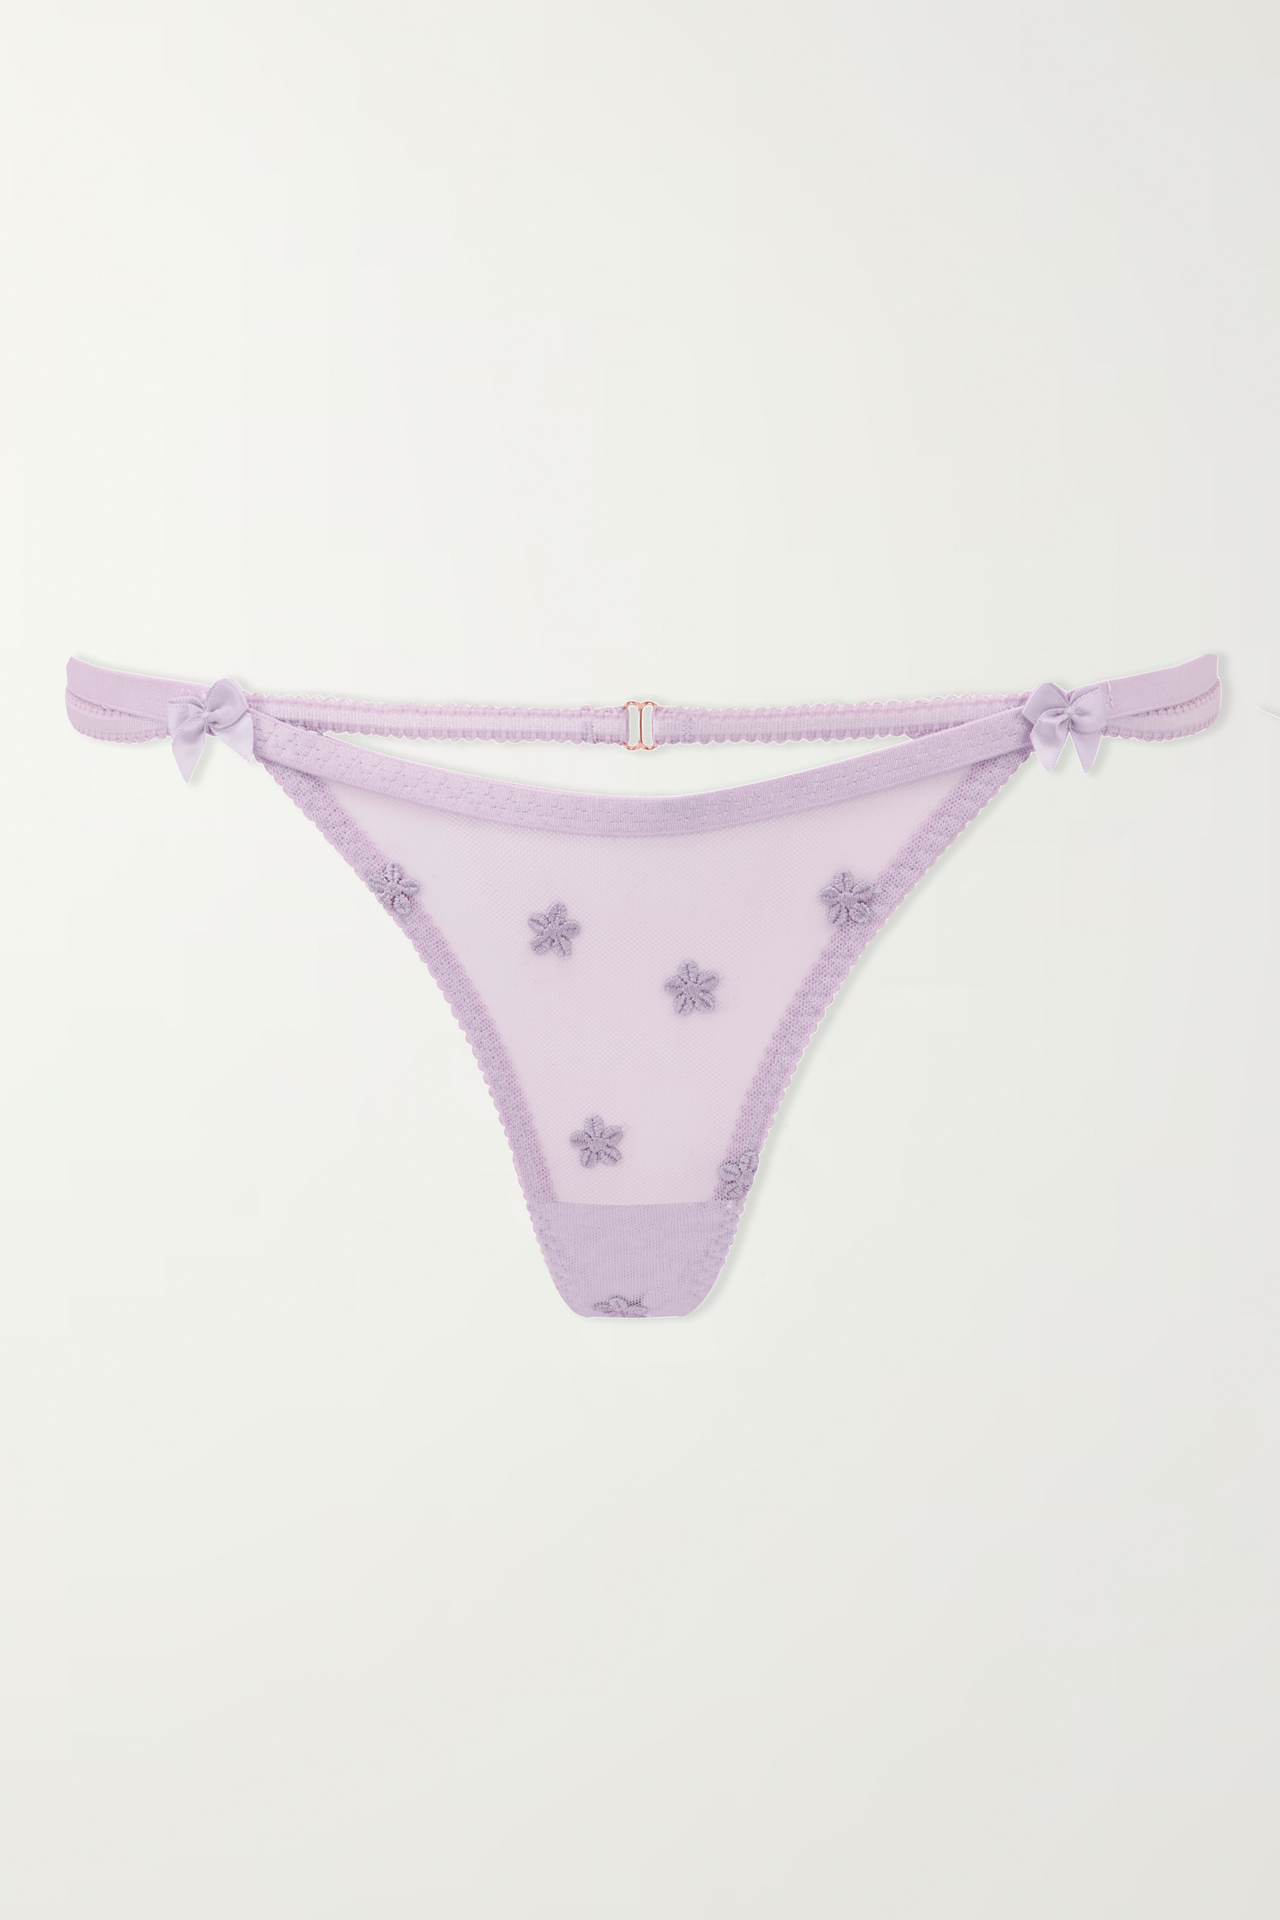 'In His Dreams' Sexy Cutout Purple Thong